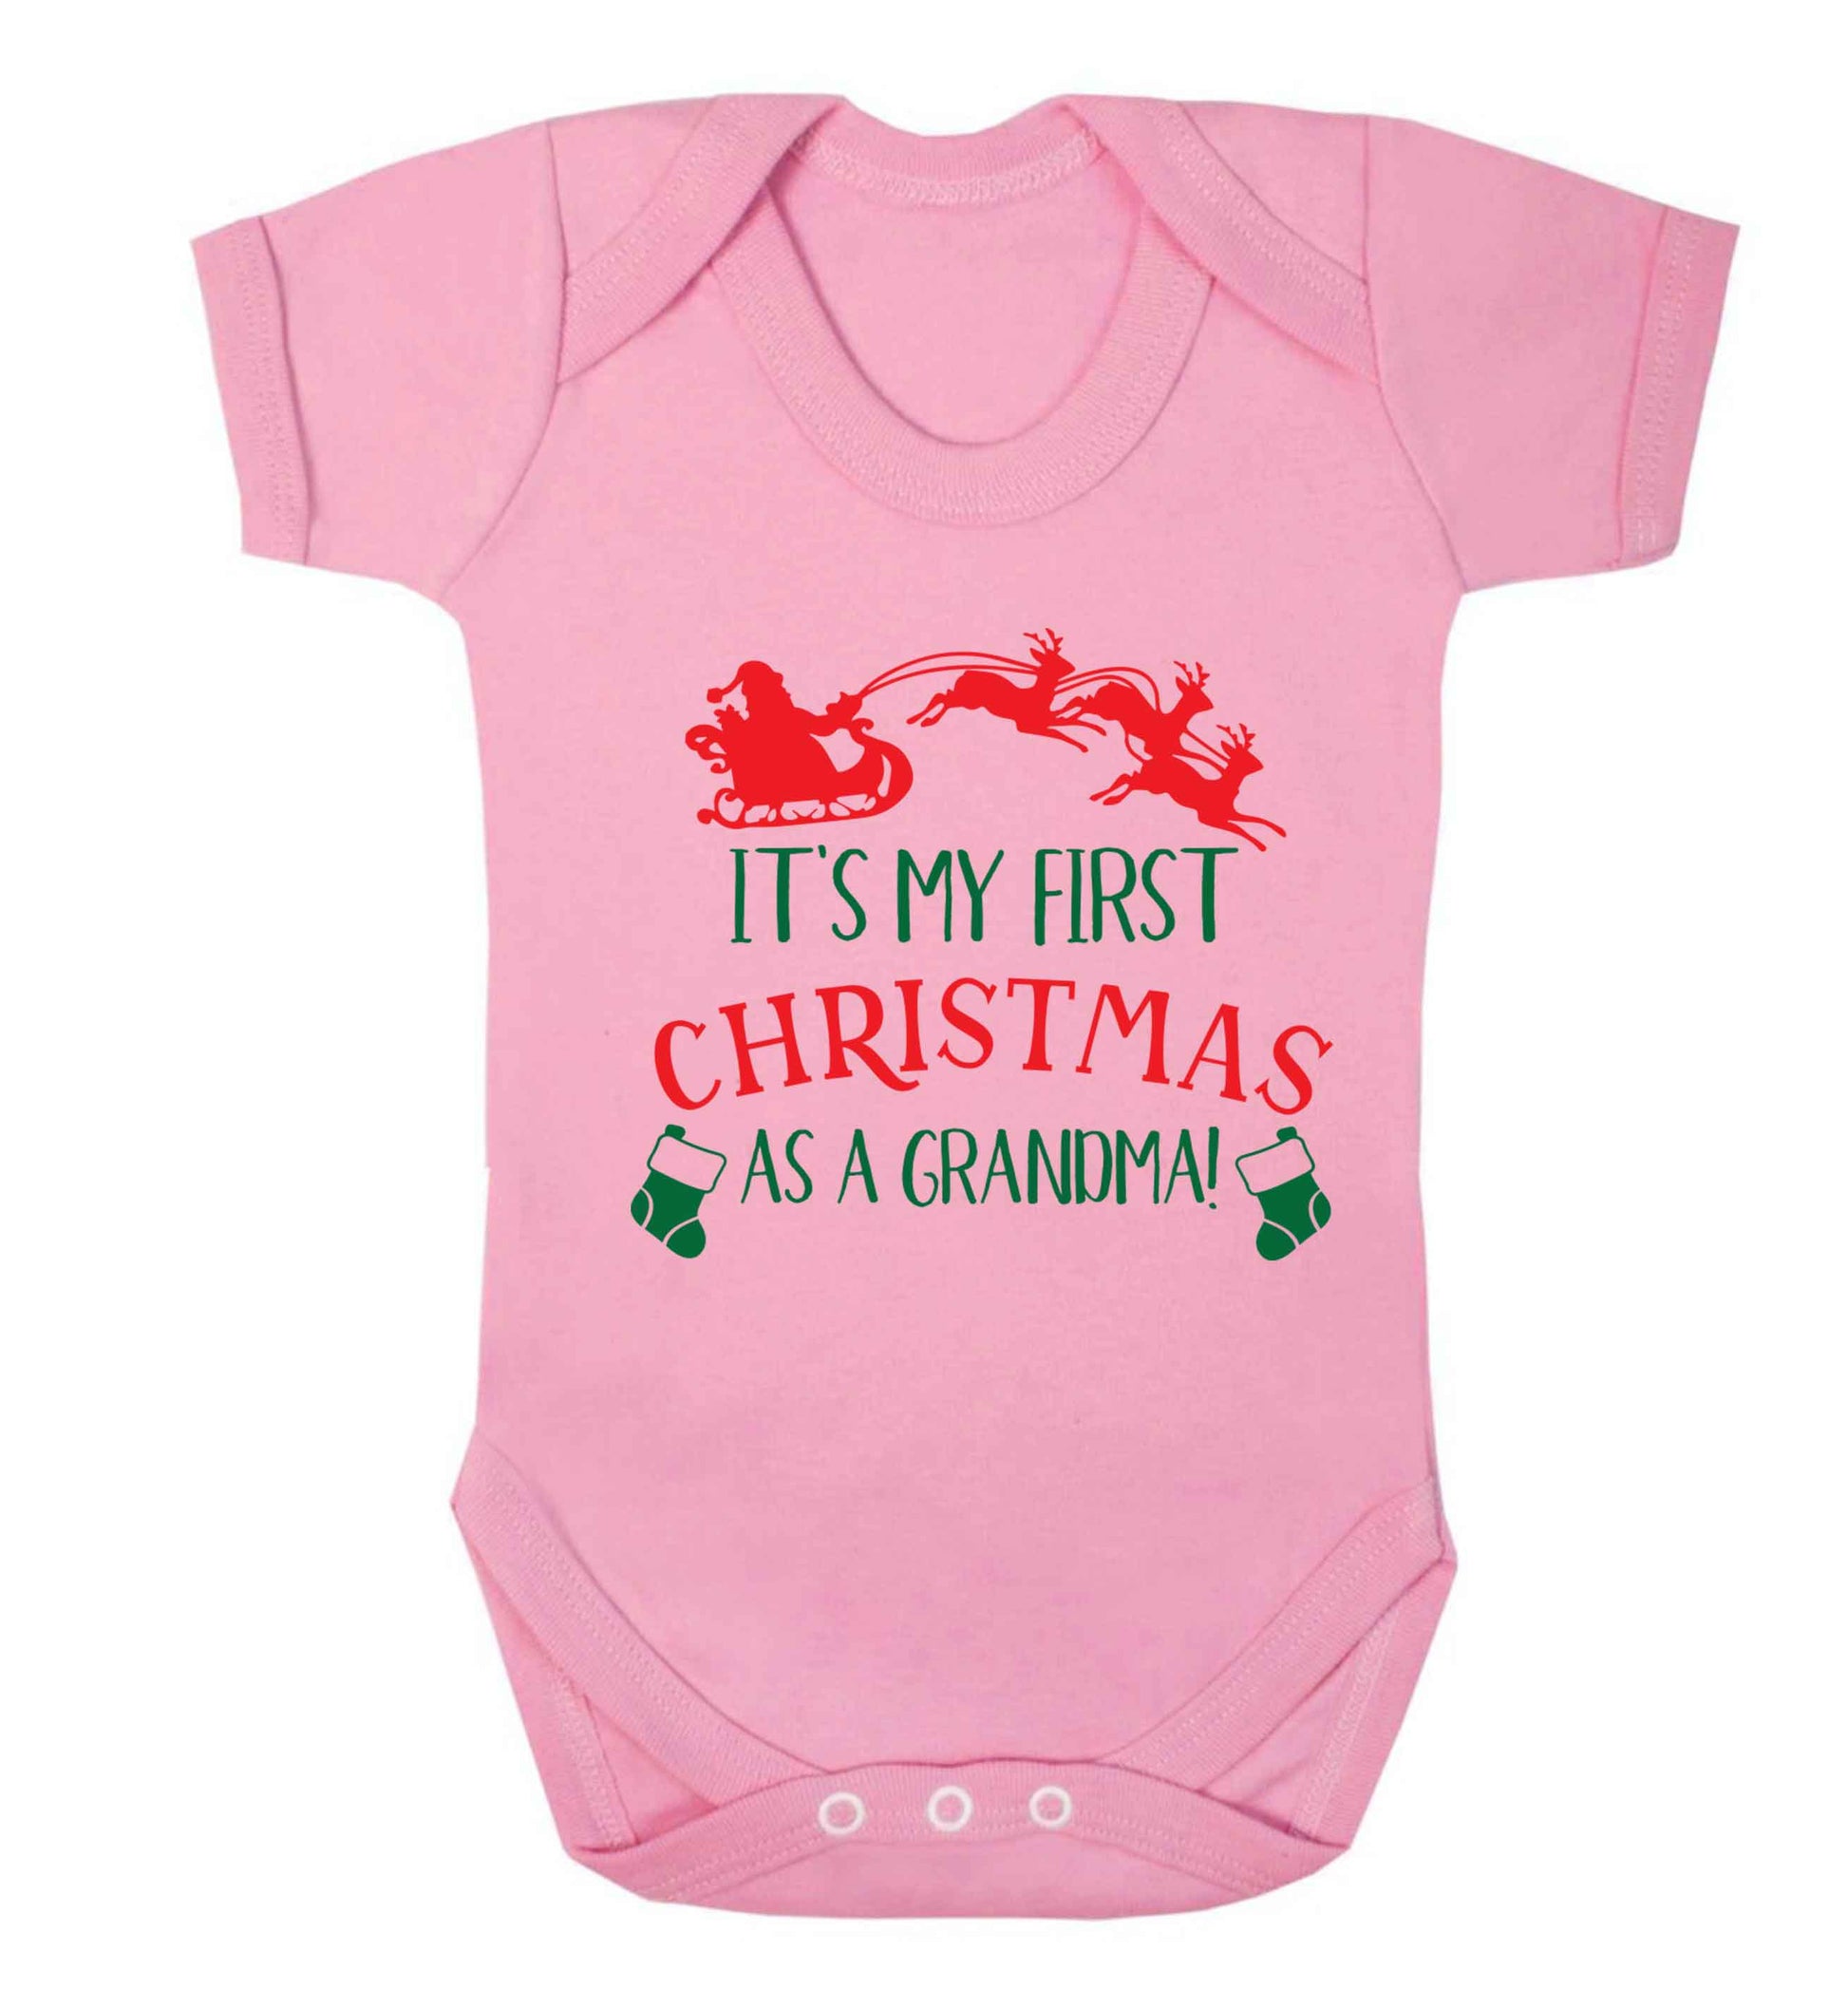 It's my first Christmas as a grandma! Baby Vest pale pink 18-24 months